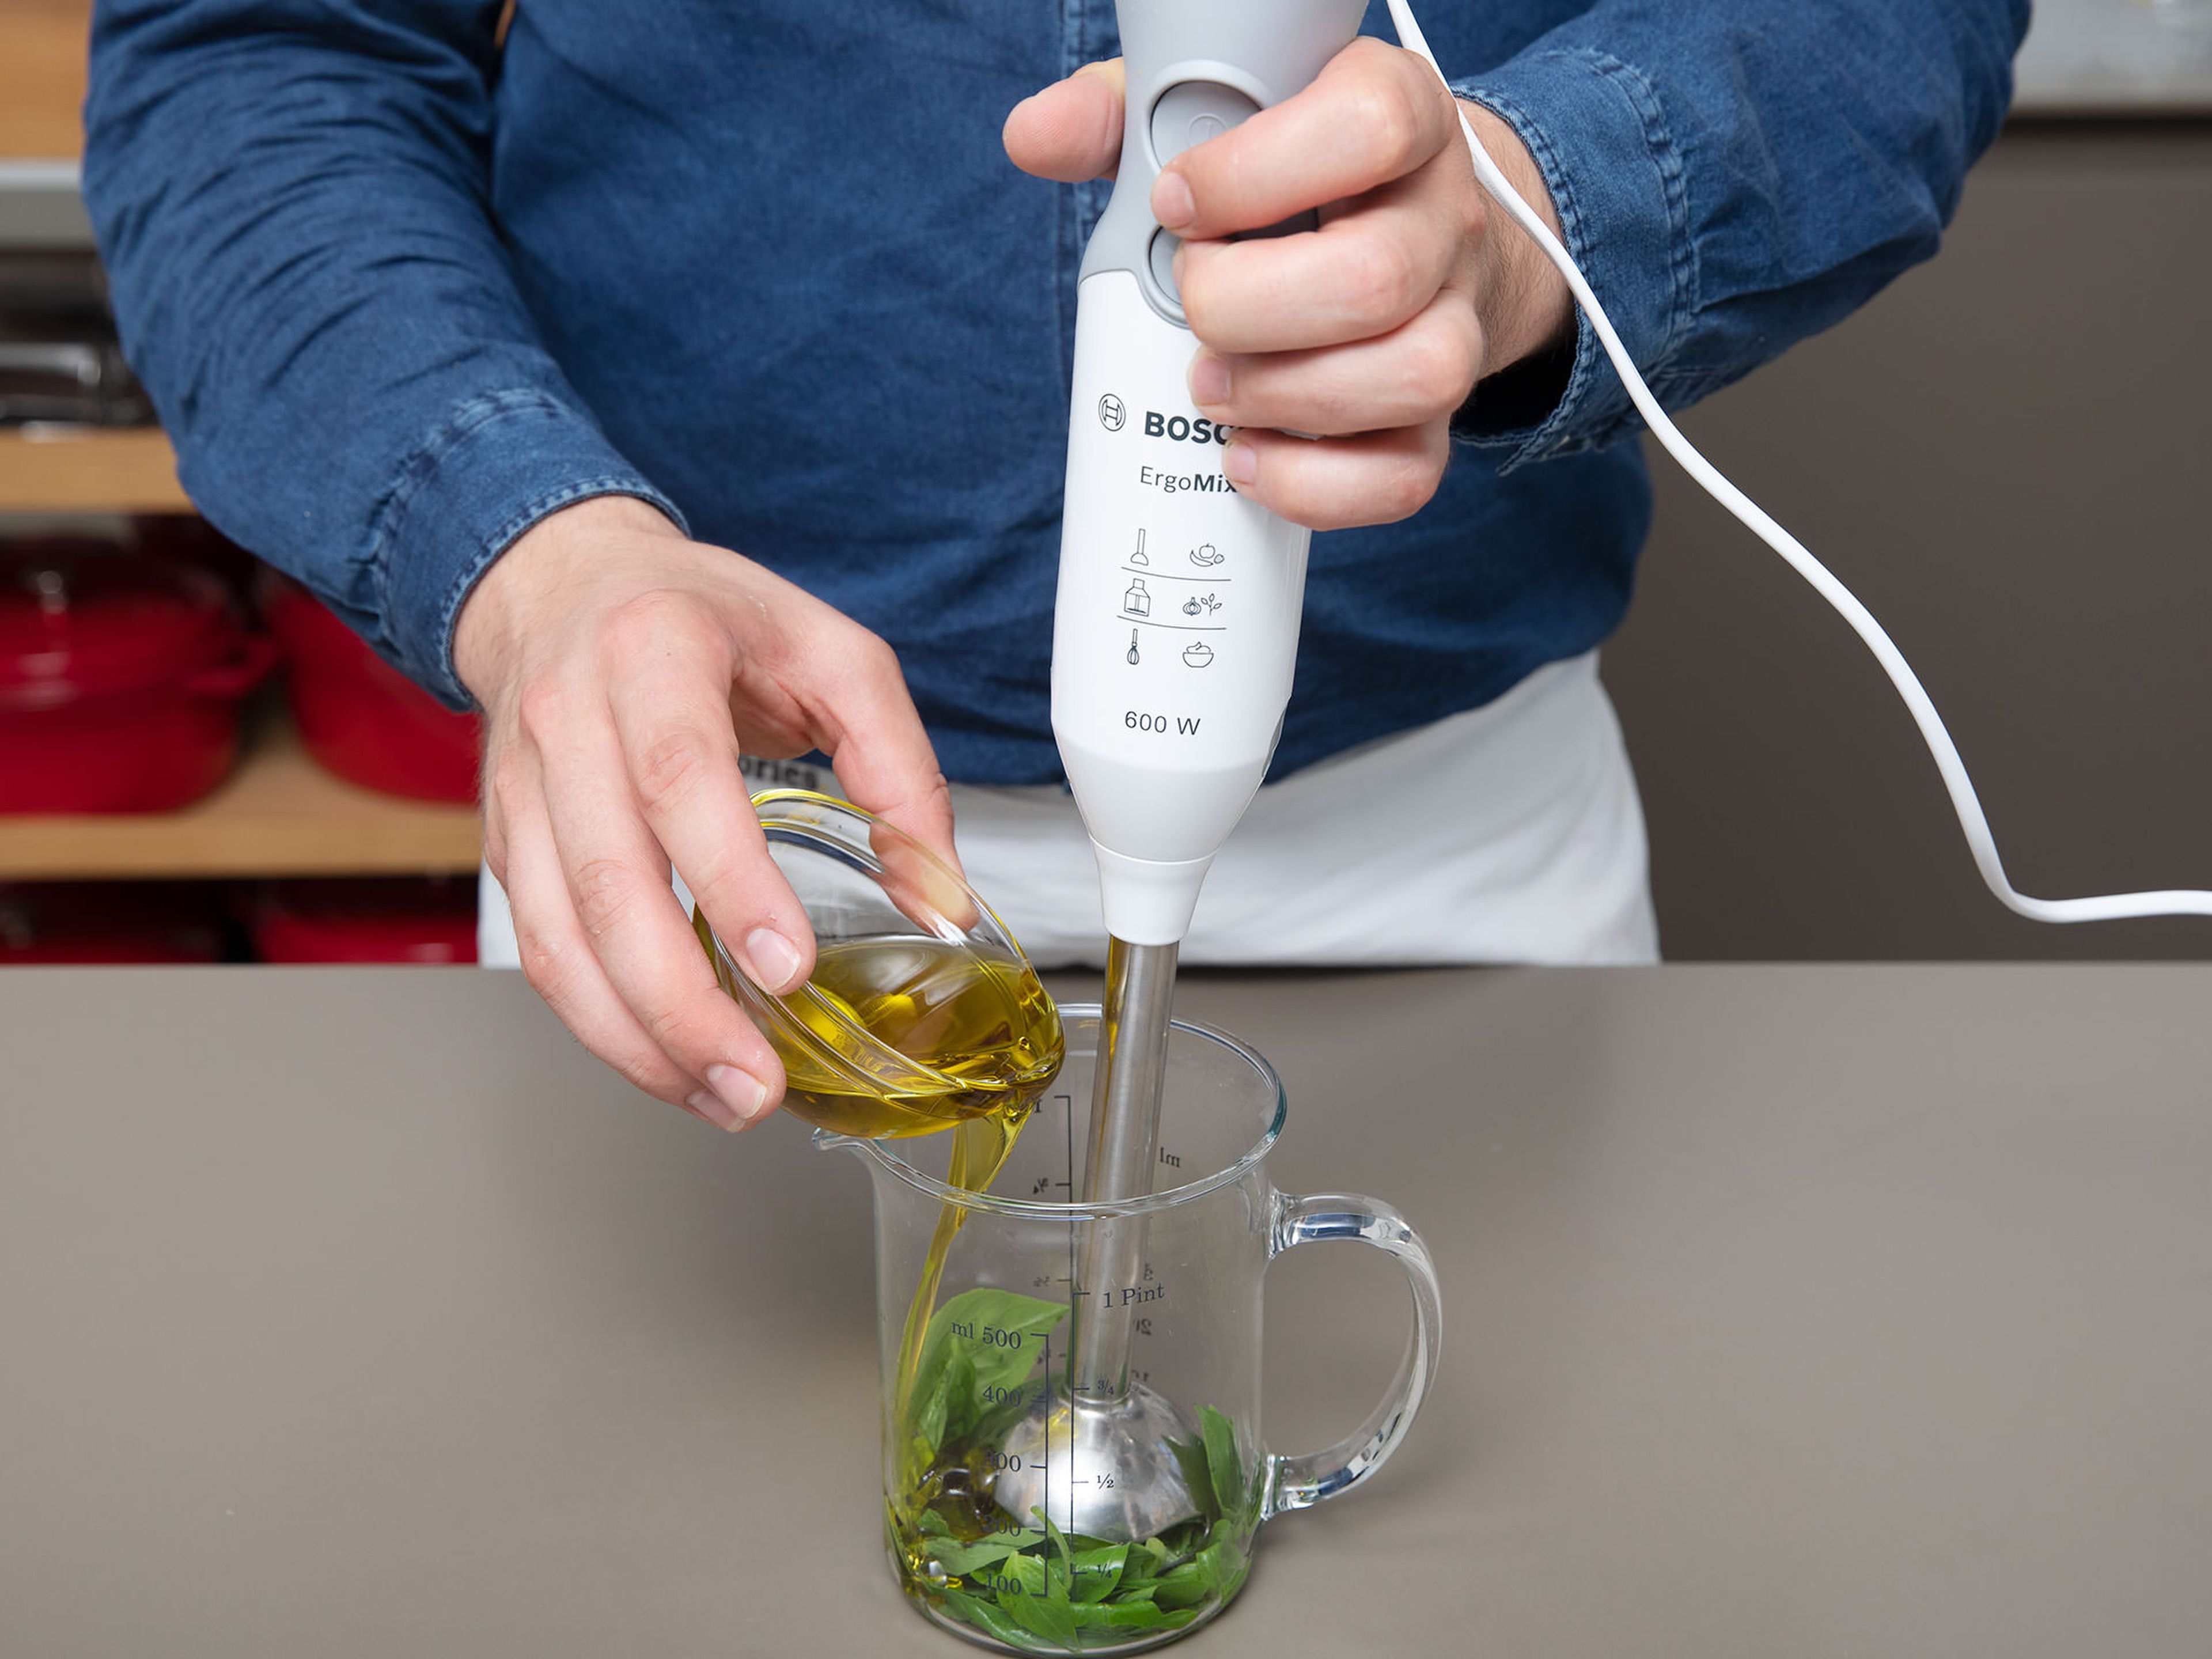 Add blanched basil leaves and olive oil into a liquid measuring cup and pulse until smooth with an immersion blender. Season with salt and pepper and strain the oil through a clean sieve so you are left with the bright green basil oil.